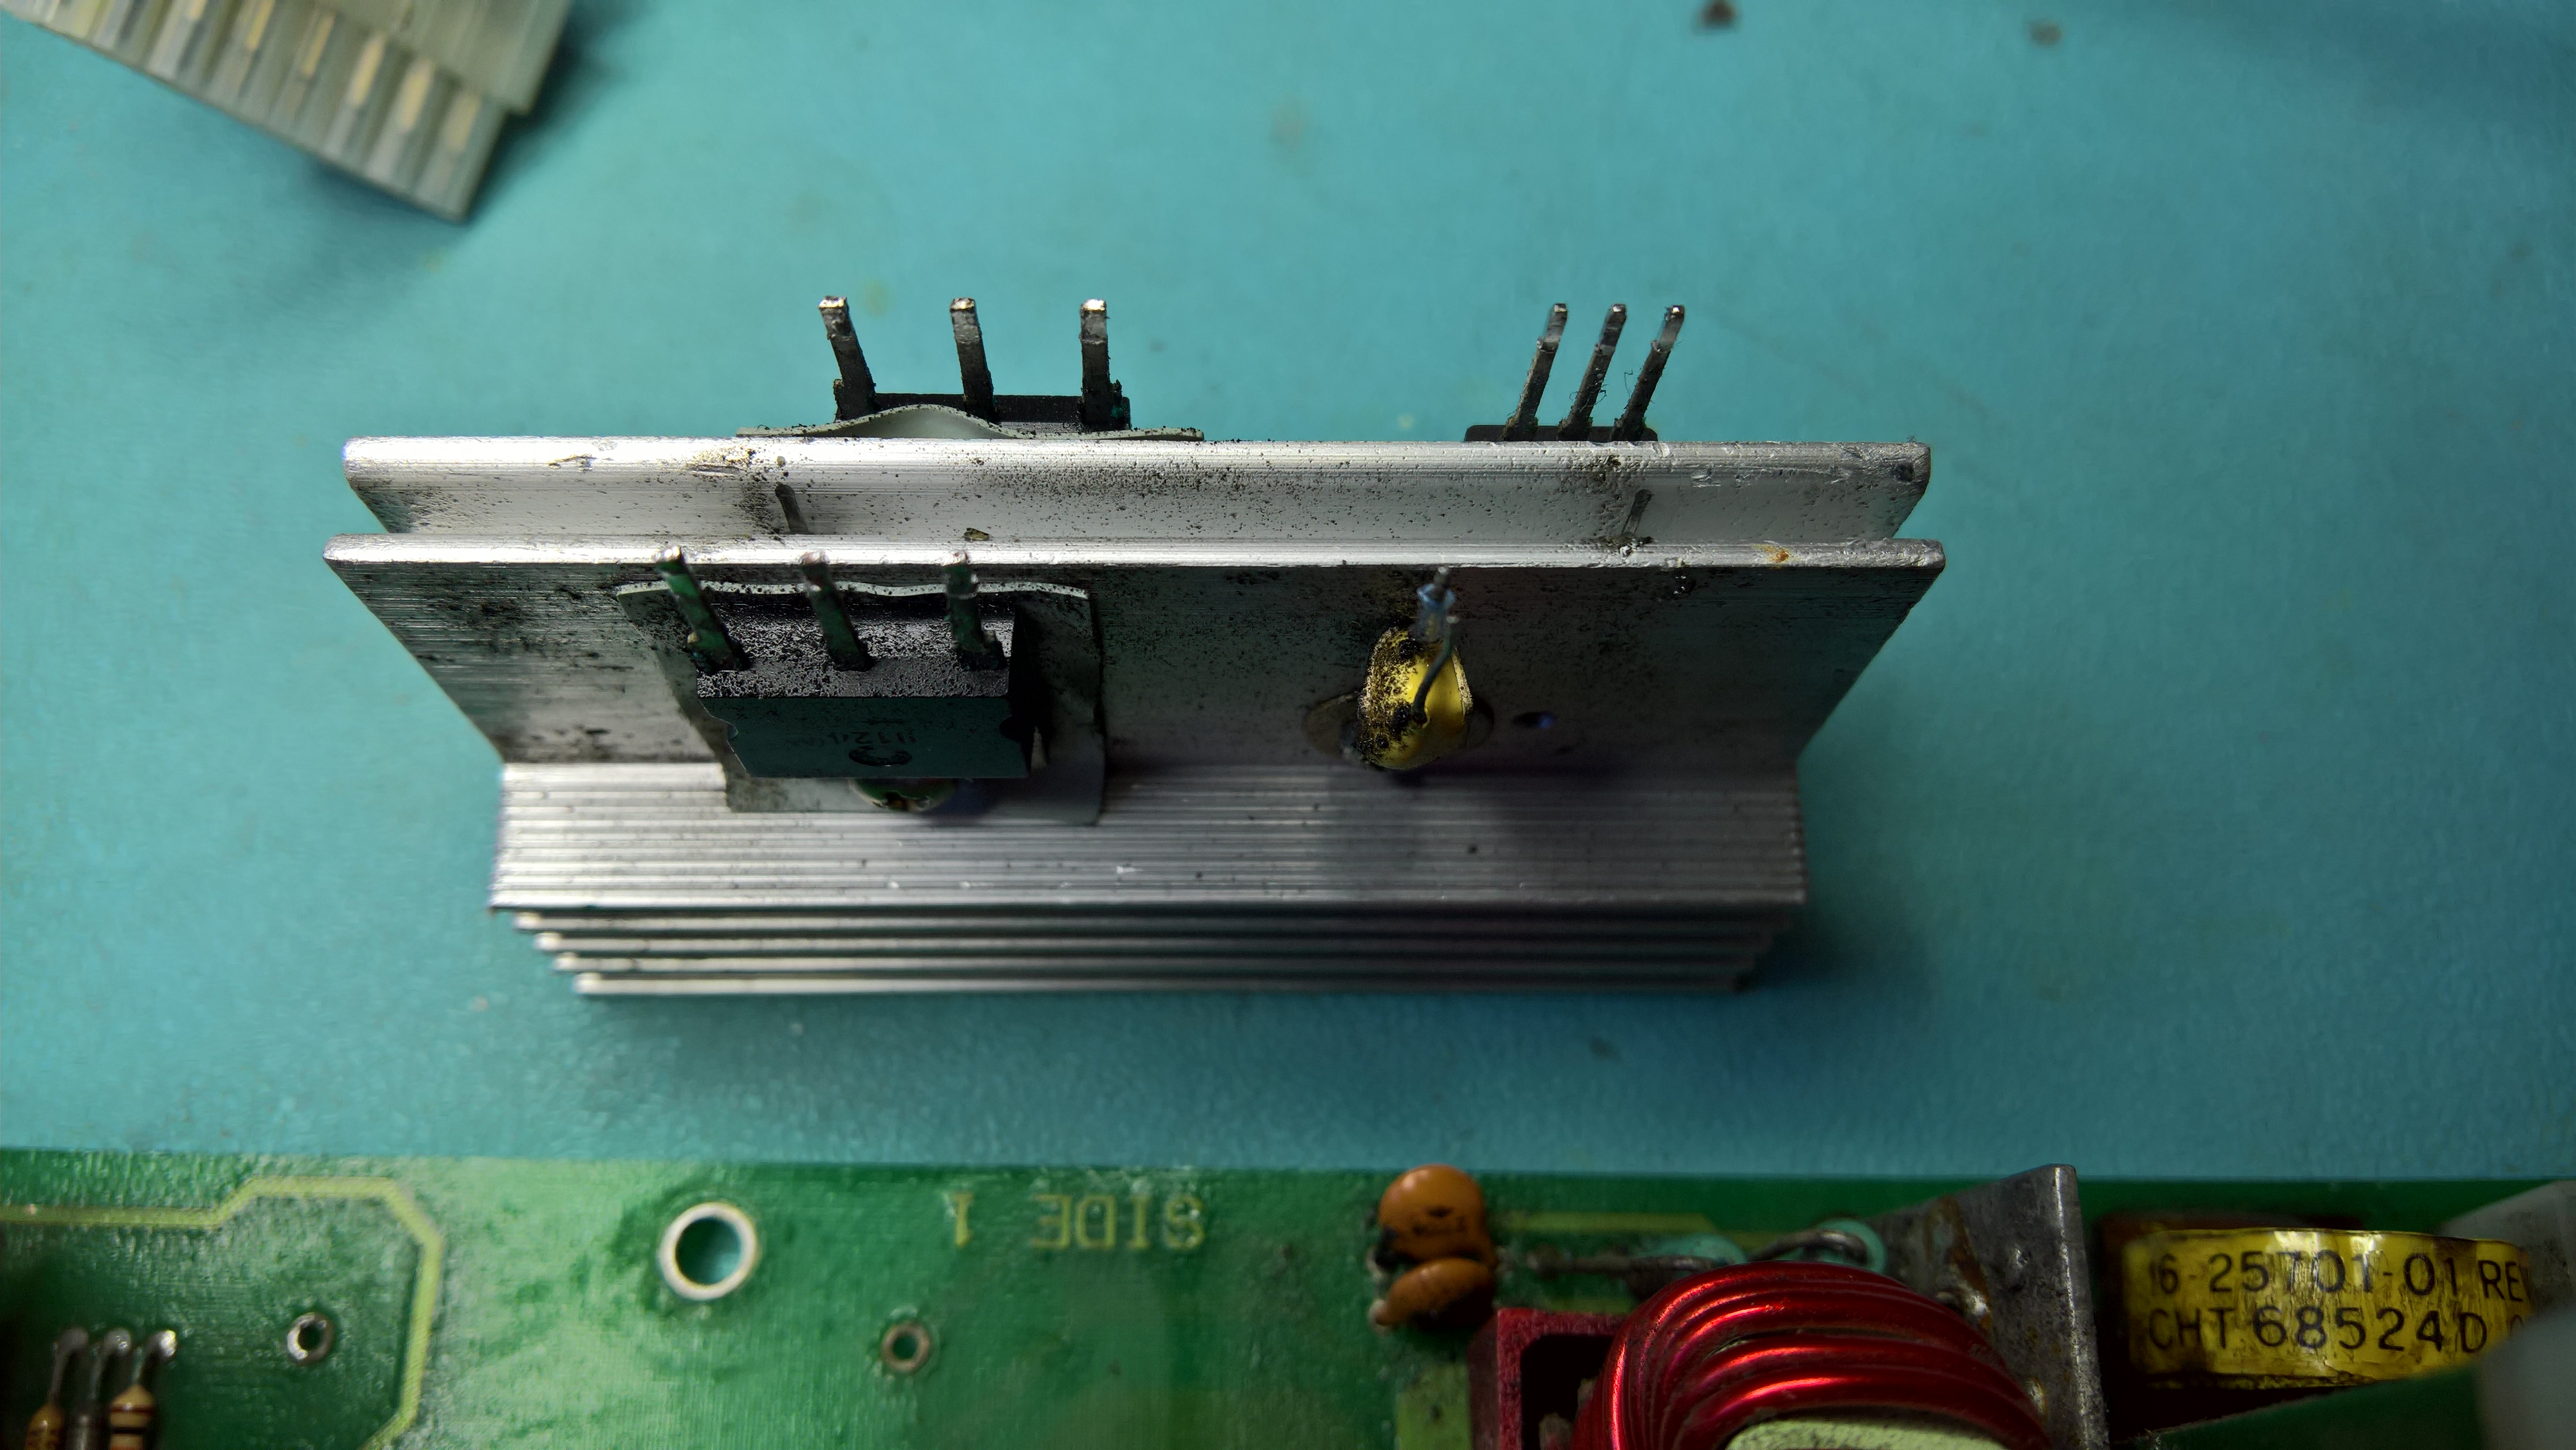 H7826 Heatsink With Output Rectifier Parts And Temperature